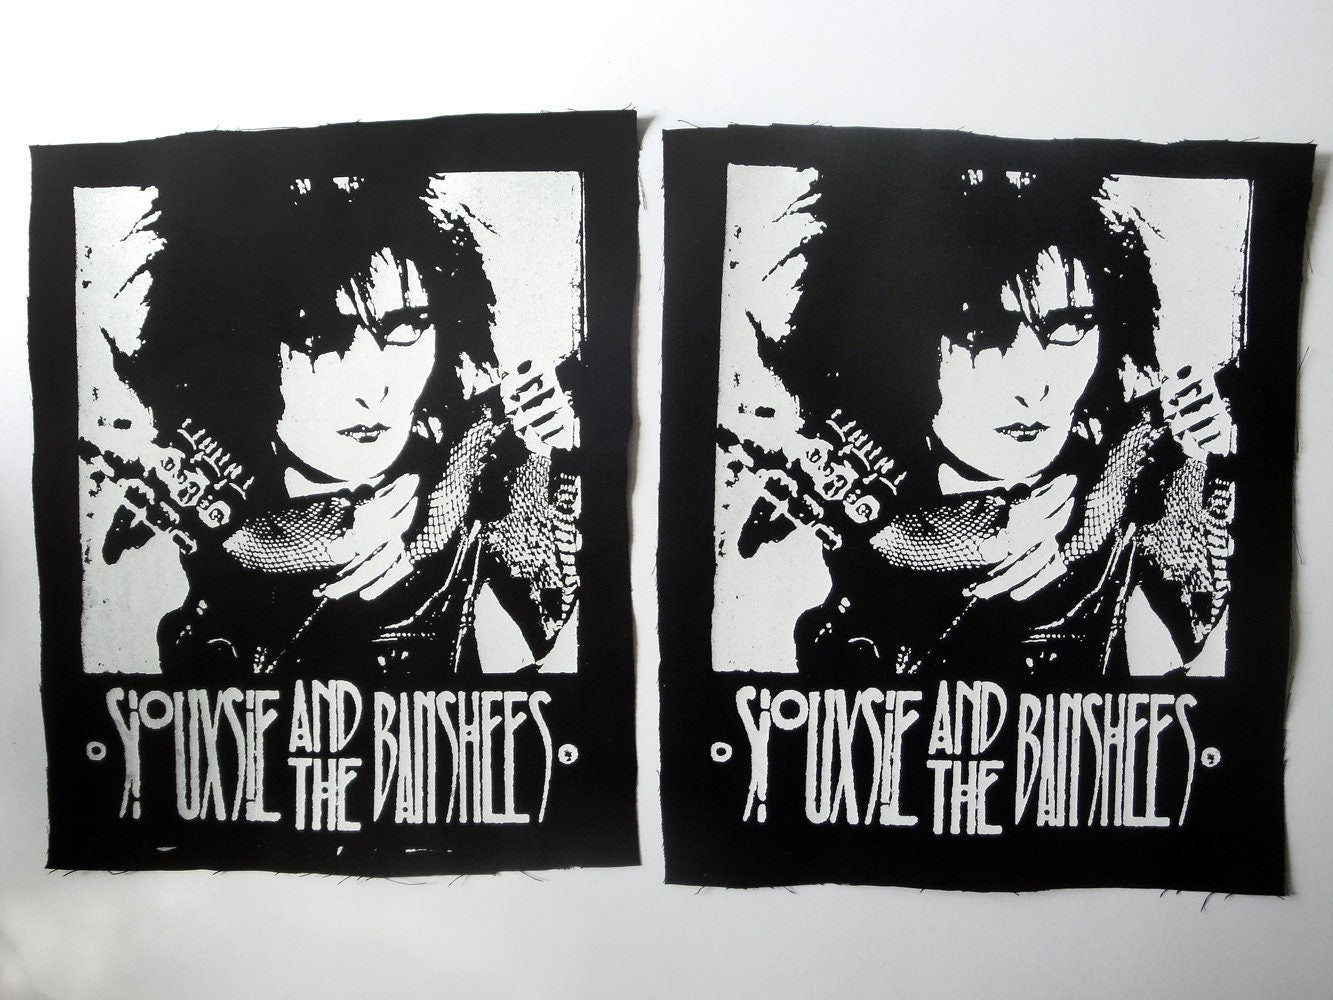 Siouxsie and the Banshees Screen print Sew-on Back Patch